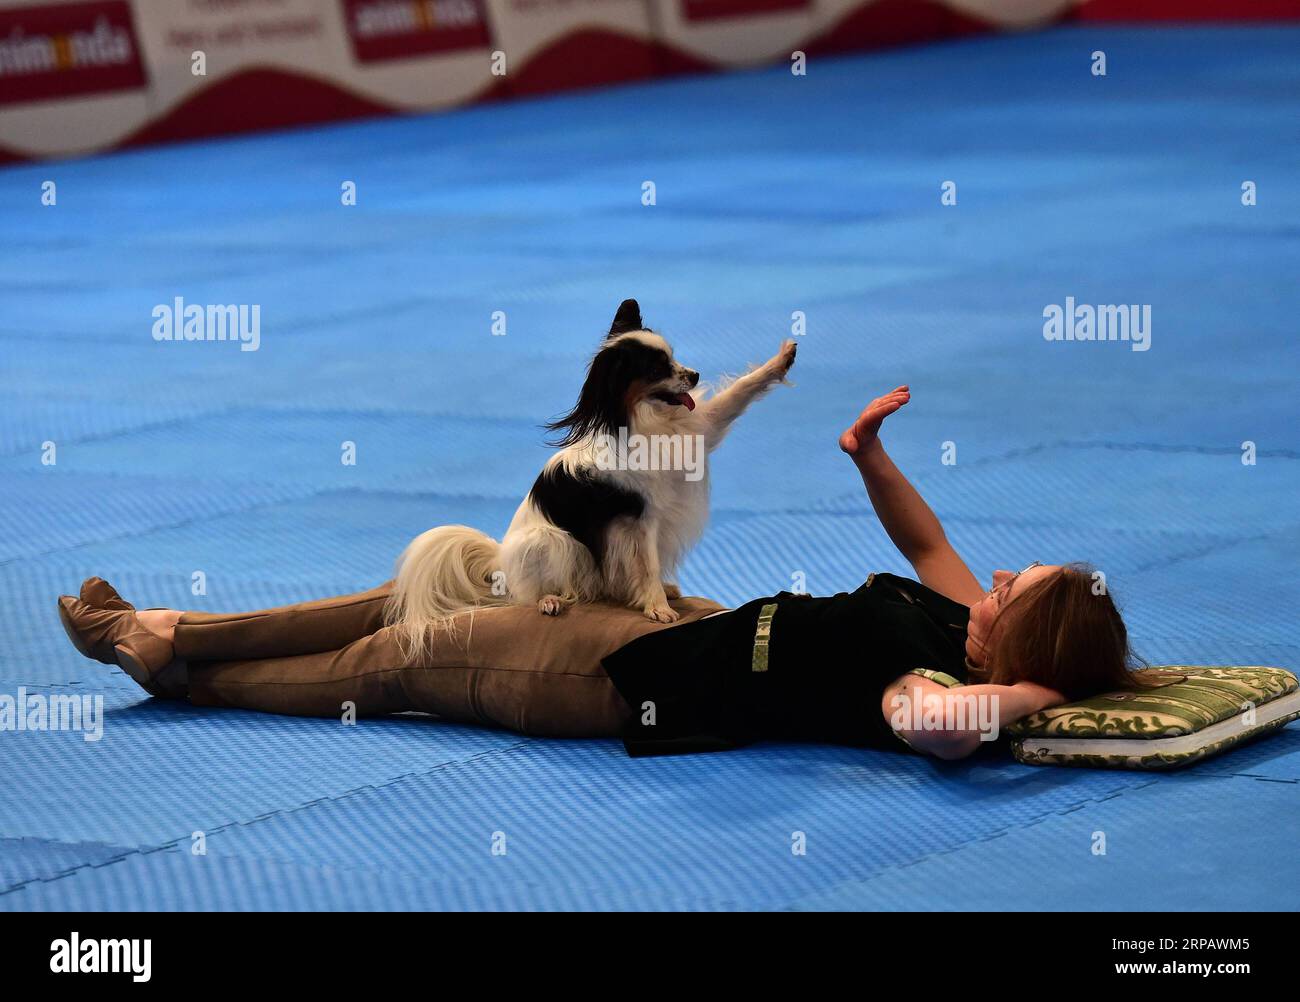 (190519) -- DORTMUND (GERMANY), May 19, 2019 (Xinhua) -- Cora Czermak from Germany attends the Dog Dancing competition with her dog Steps, a Papillon, during the Hund and Katz exhibition in Dortmund, Germany, on May 19, 2019. The three-day event hosted by German Kennel Club, presents dogs and cats of more than 200 breeds from around the world. (Xinhua/Lu Yang) GERMANY-DORTMUND-DOG-CAT-EXHIBITION PUBLICATIONxNOTxINxCHN Stock Photo